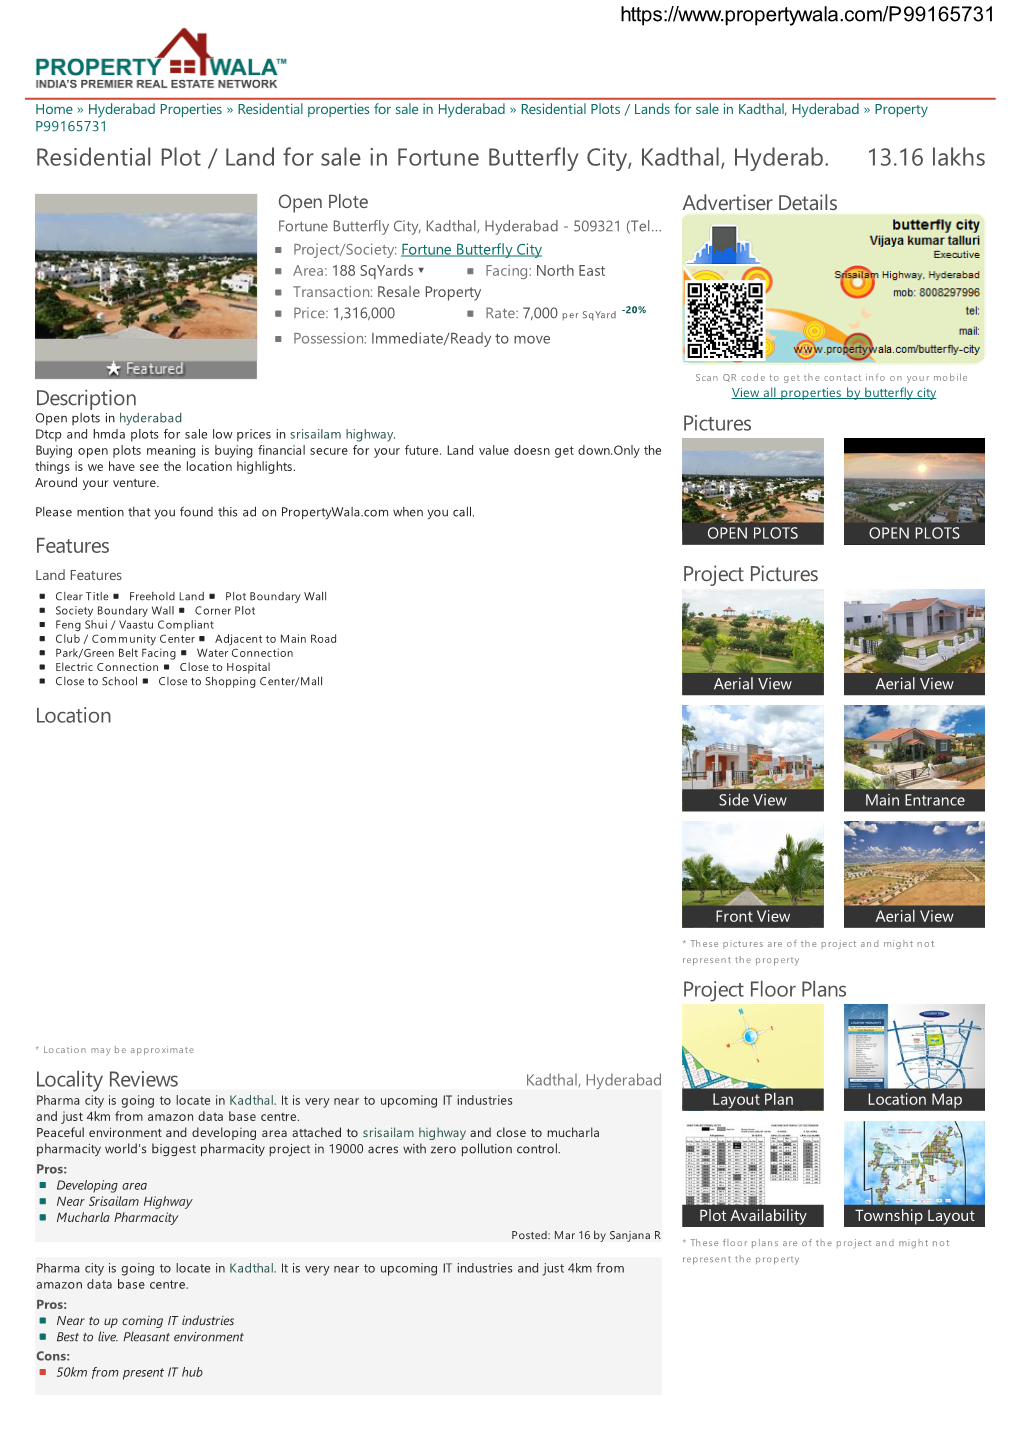 Residential Plot / Land for Sale in Fortune Butterfly City, Kadthal, Hyderabad (P99165731)